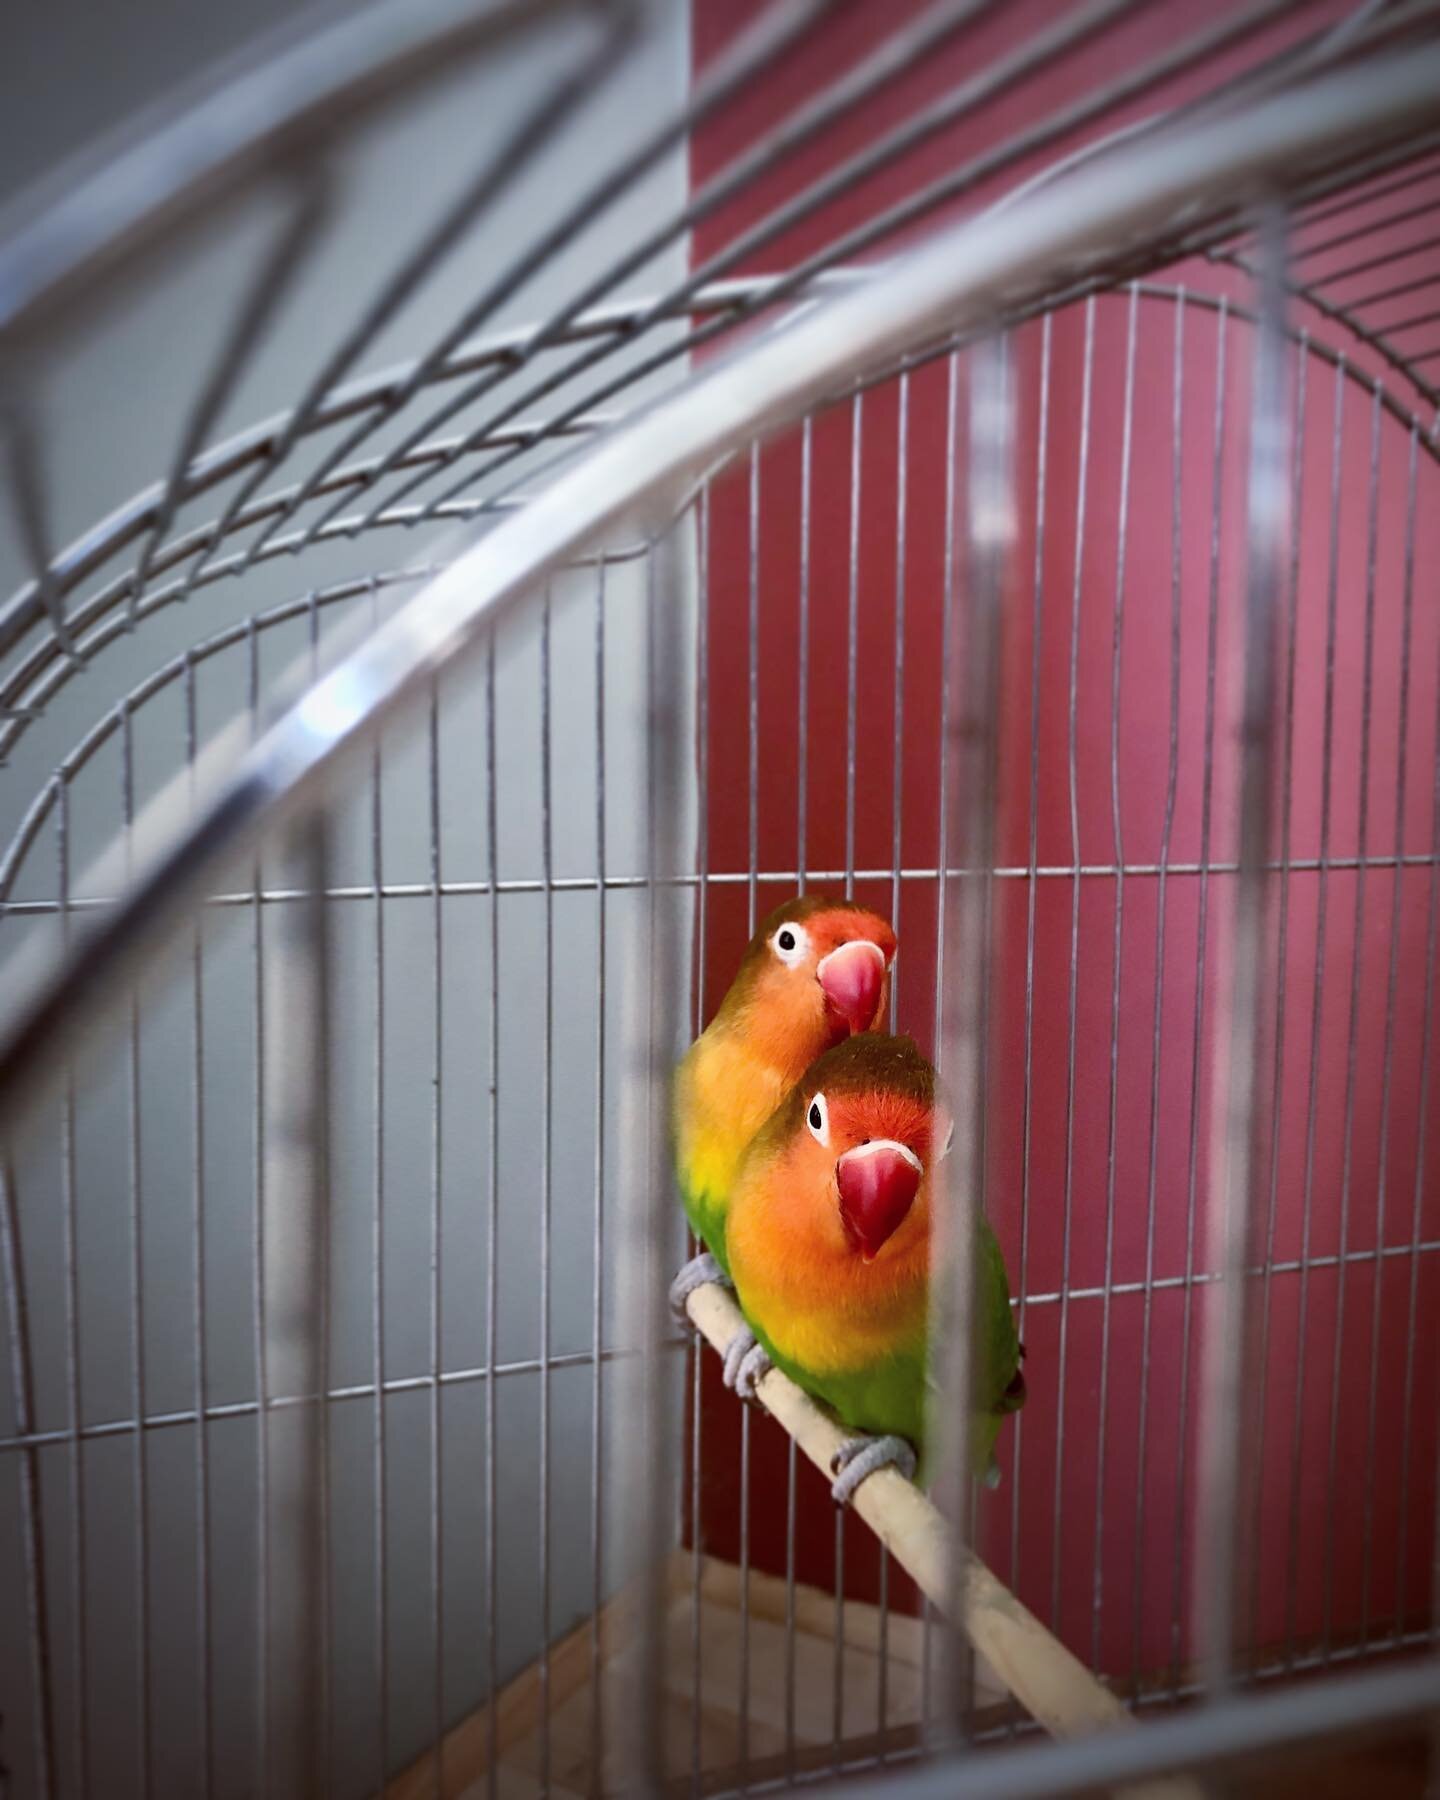 Happy Valentines from our funny lovebirds Lou + Lilu #loulilu